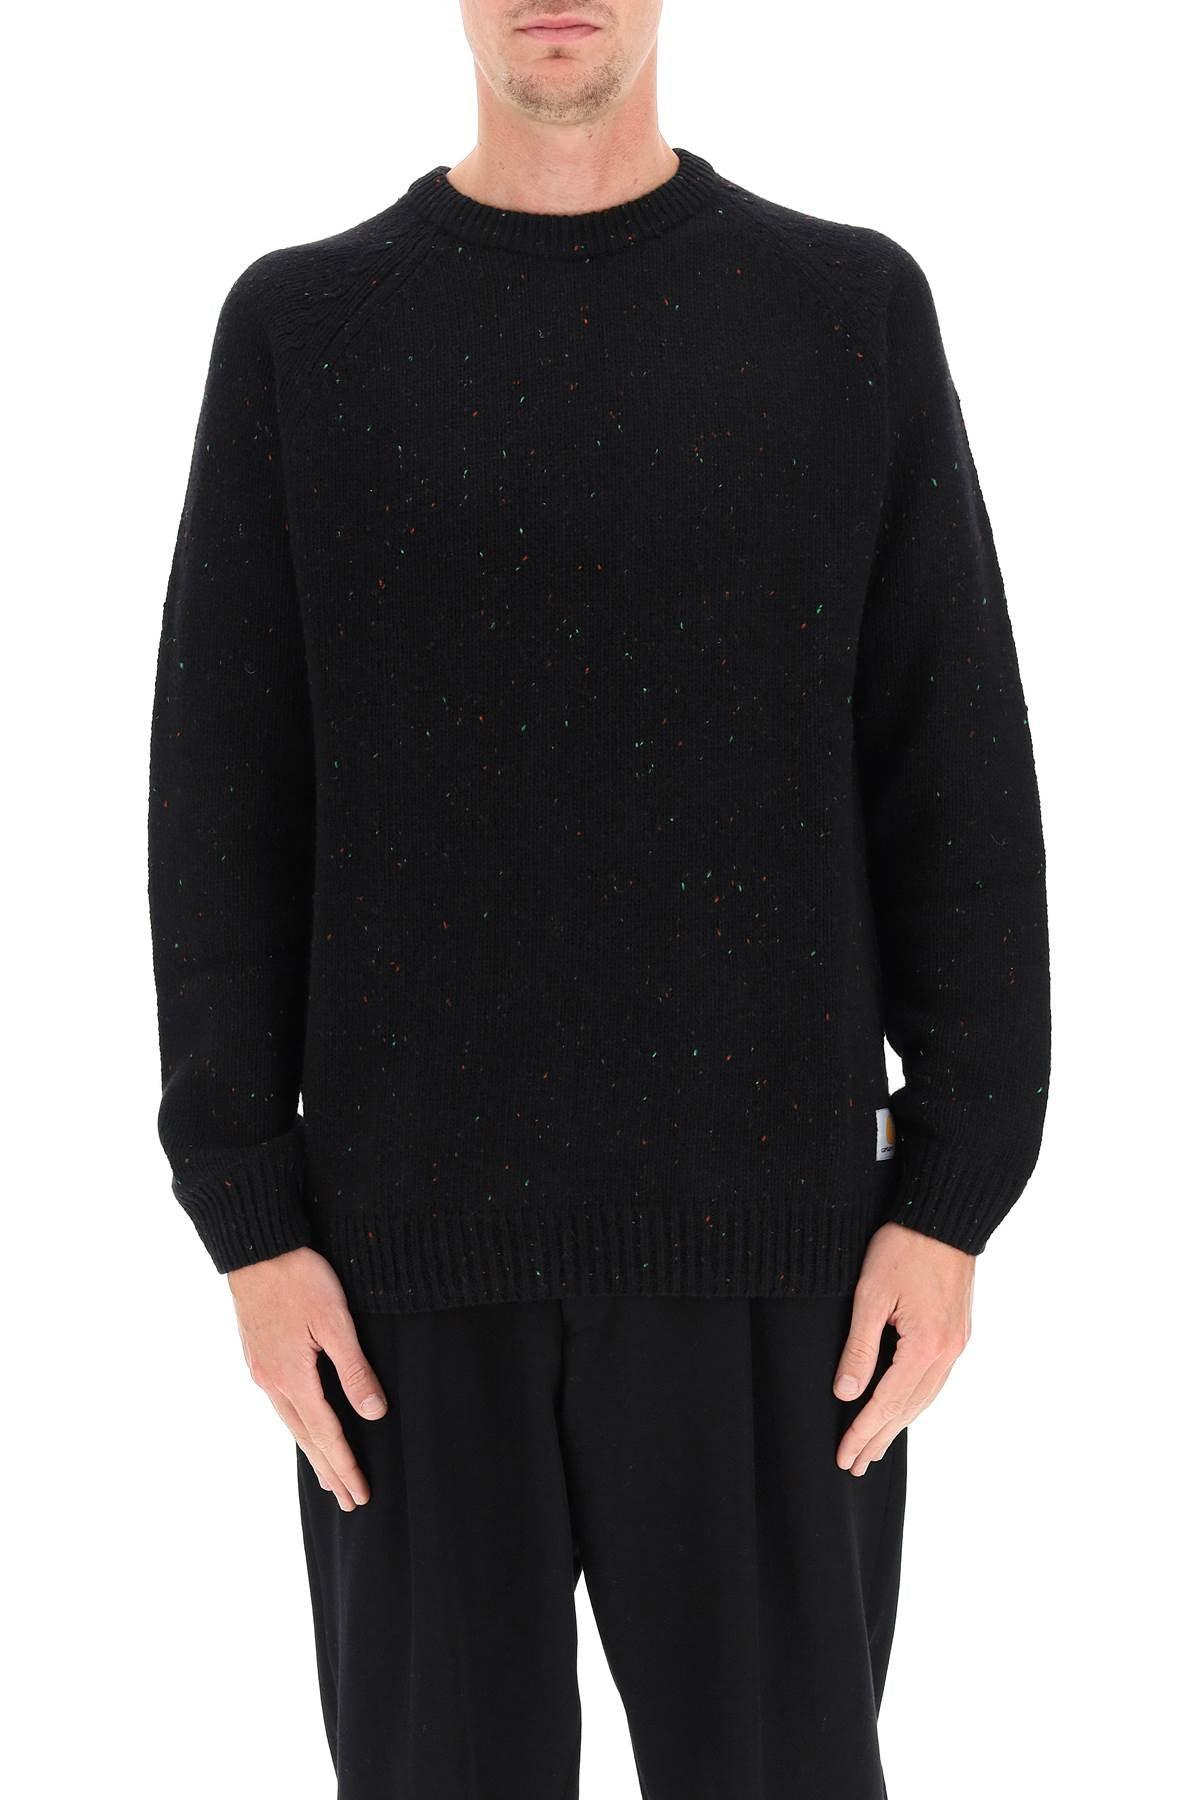 Carhartt WIP Cotton Anglistic Sweater in Black for Men - Save 50% - Lyst